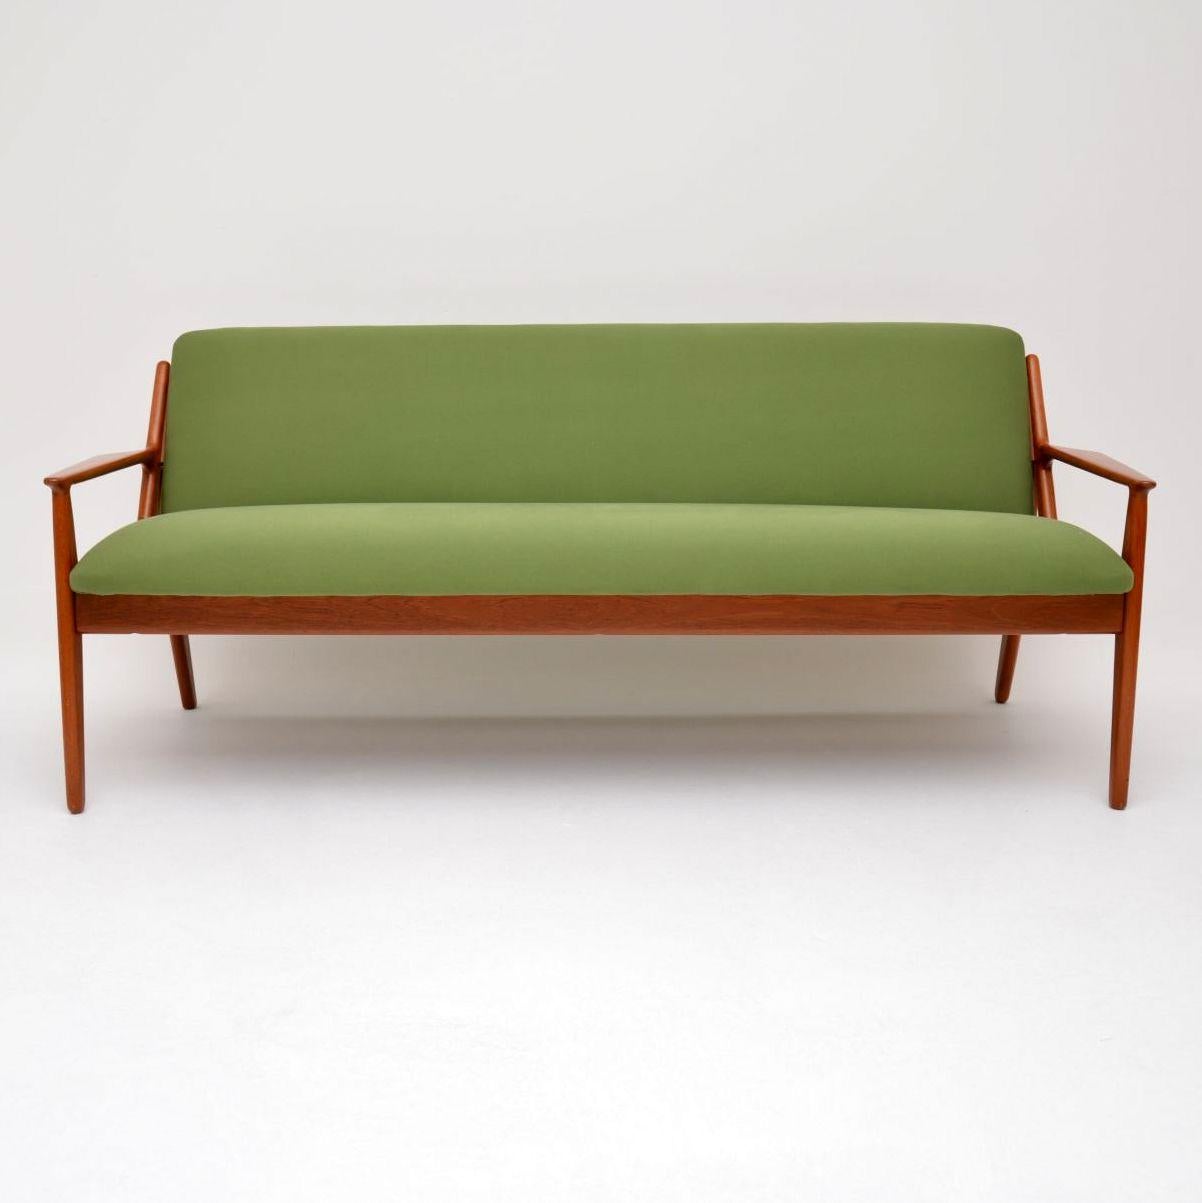 An absolutely stunning and extremely rare vintage danish sofa in solid teak, this was designed by Arne Vodder and was made by Vamo in the 1950s-1960s. We have had the frame fully stripped and re-polished to a very high standard, we’ve also had this